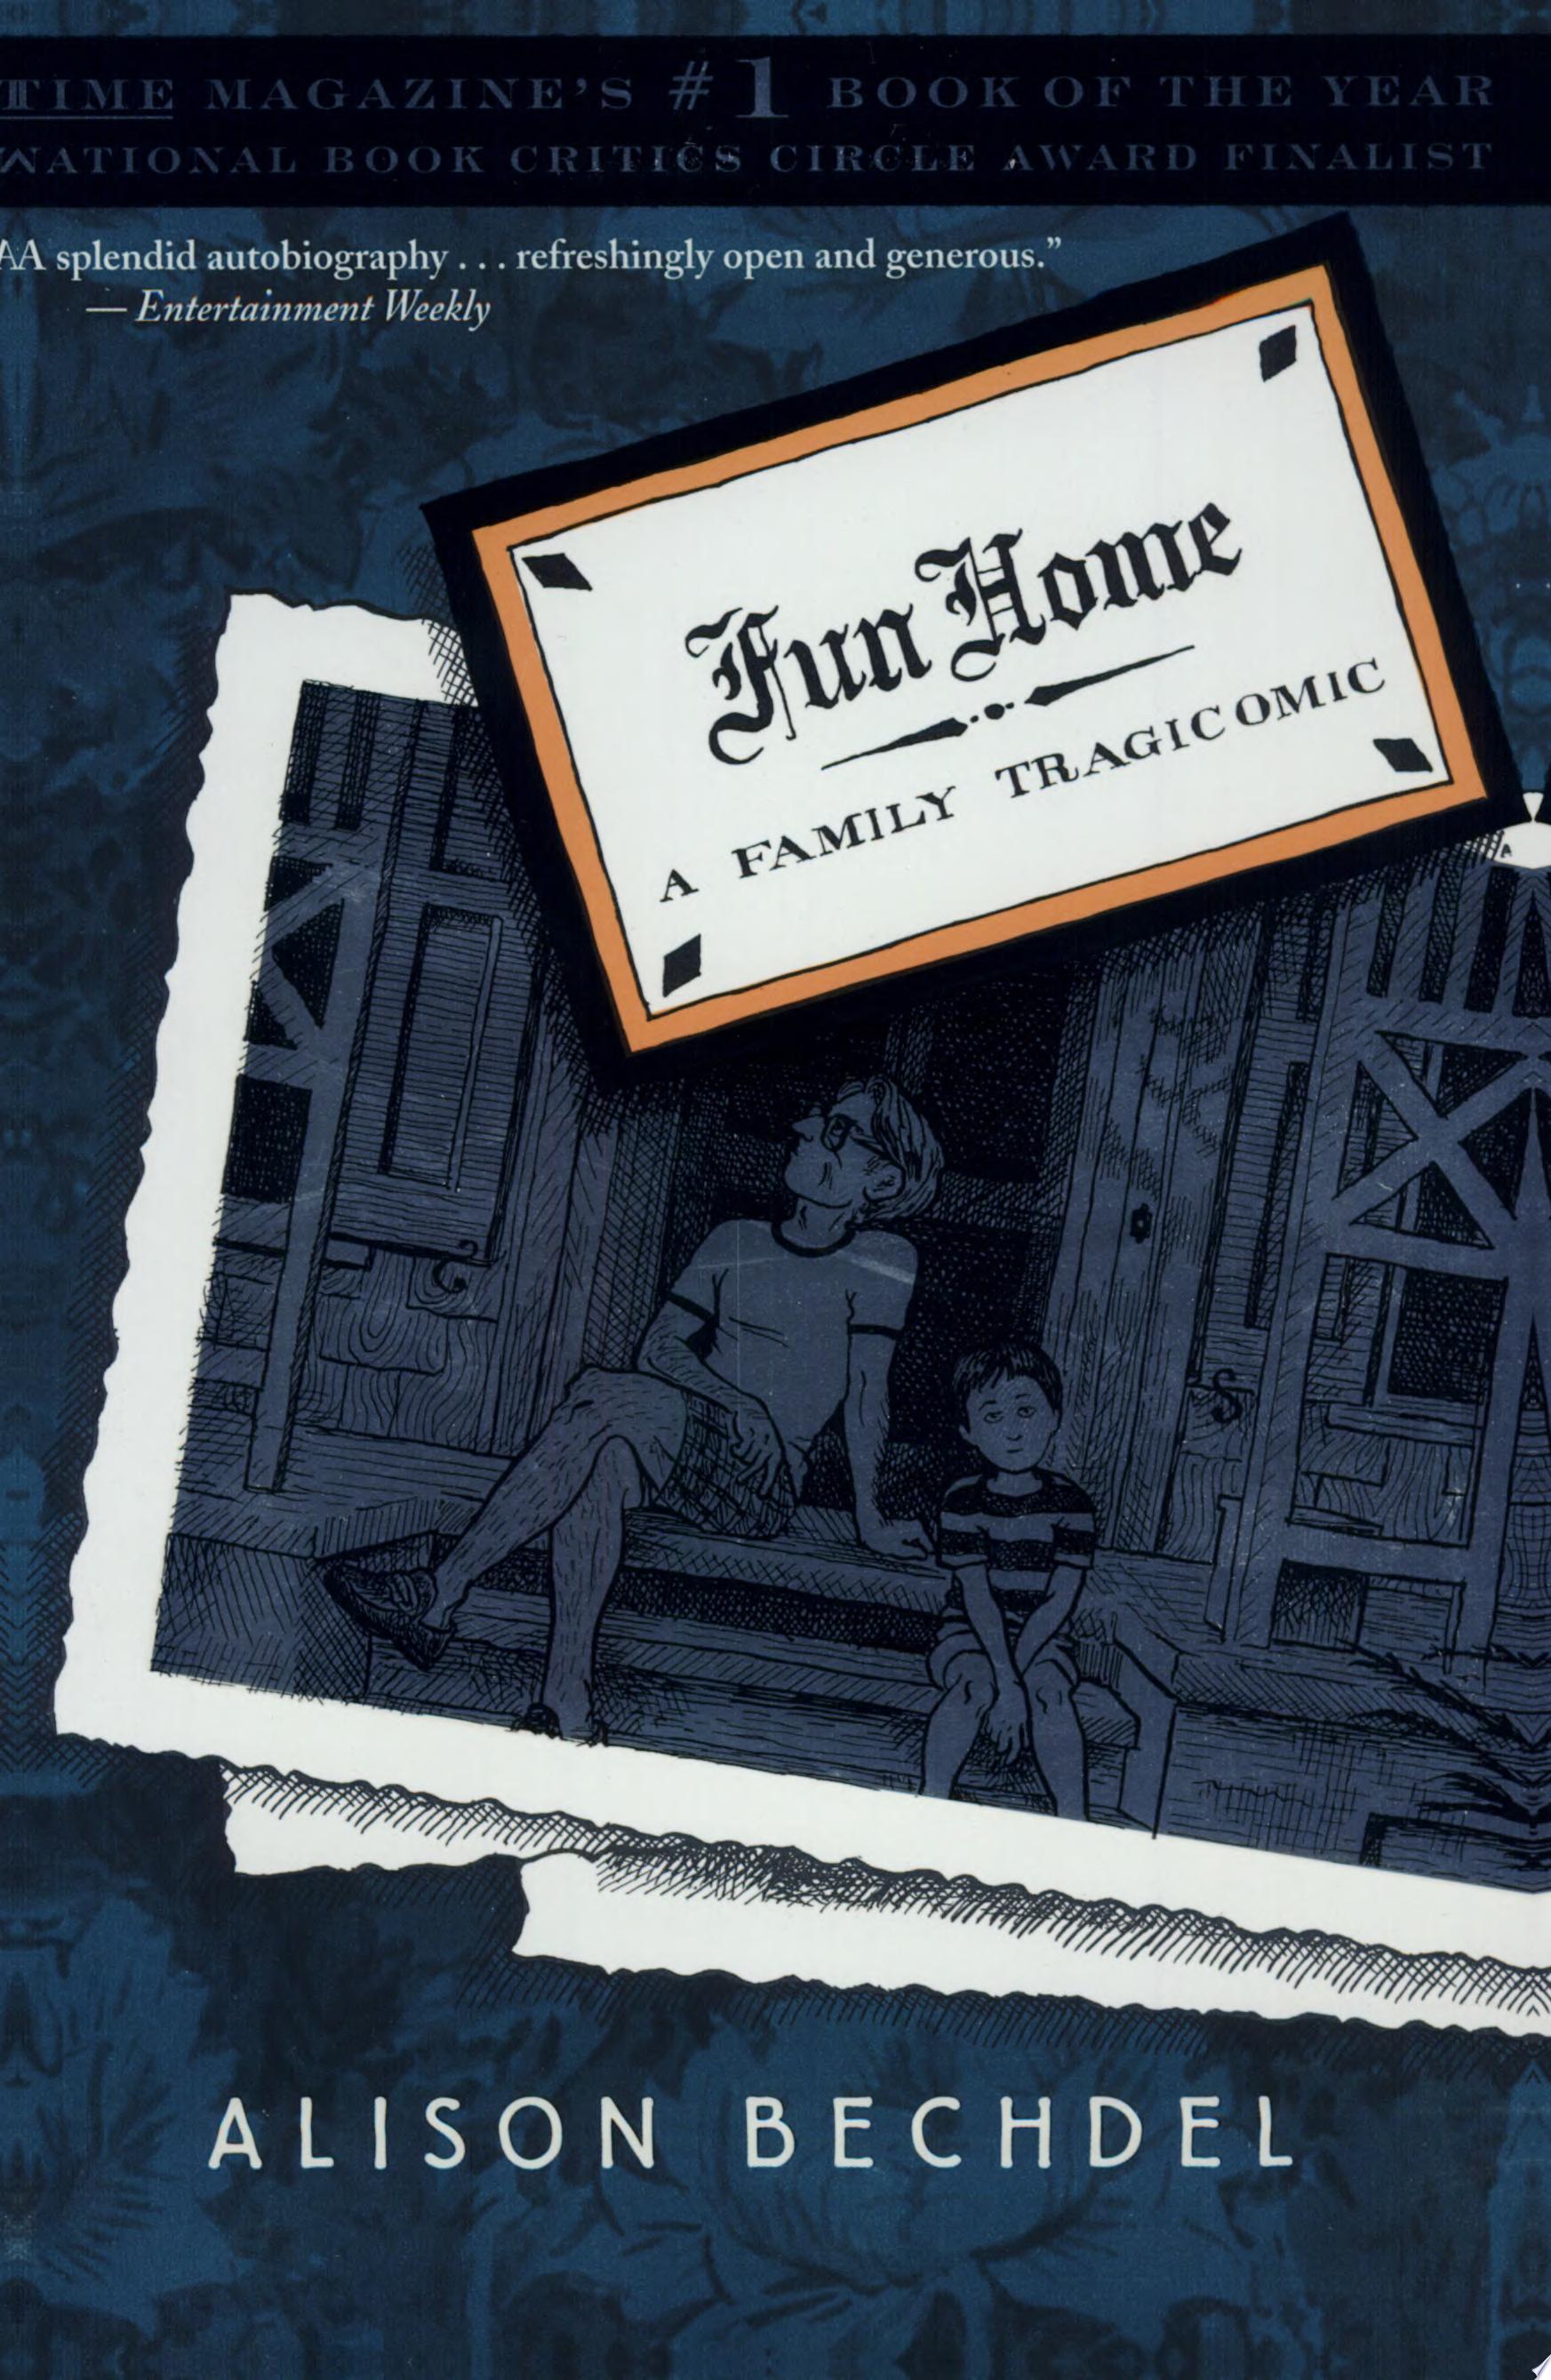 Image for "Fun Home"